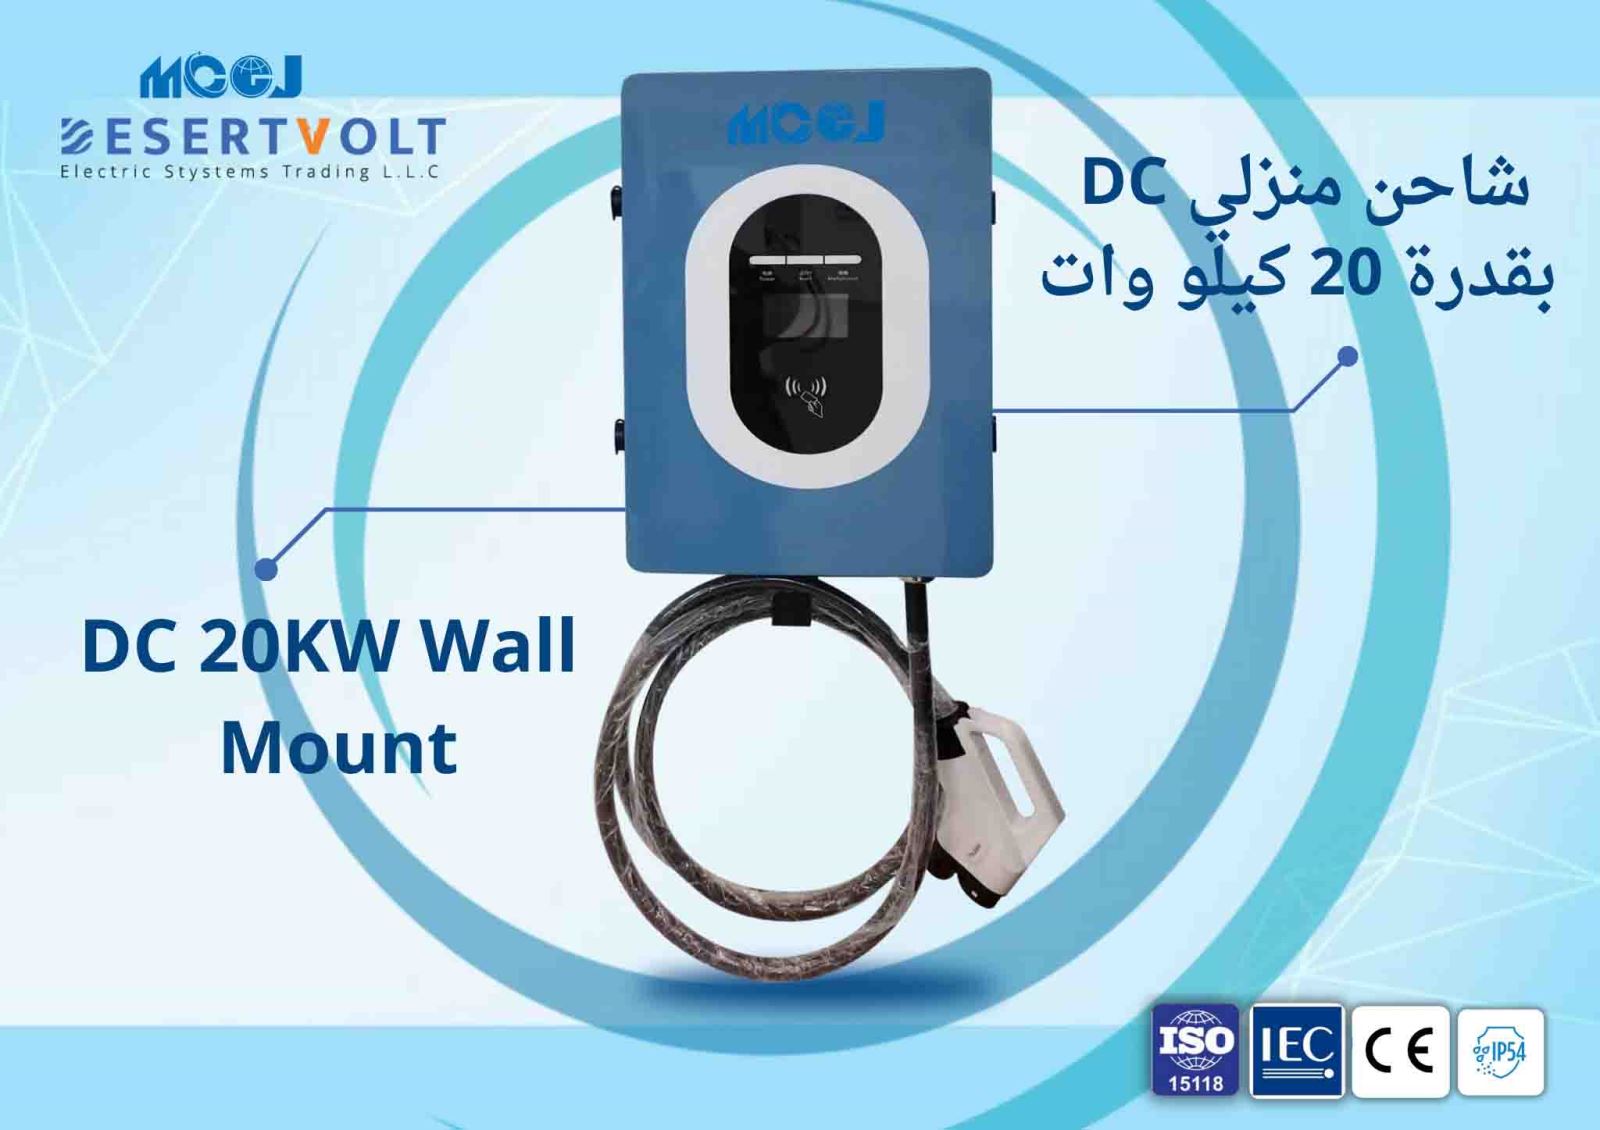 DC 20KW Wall Mount